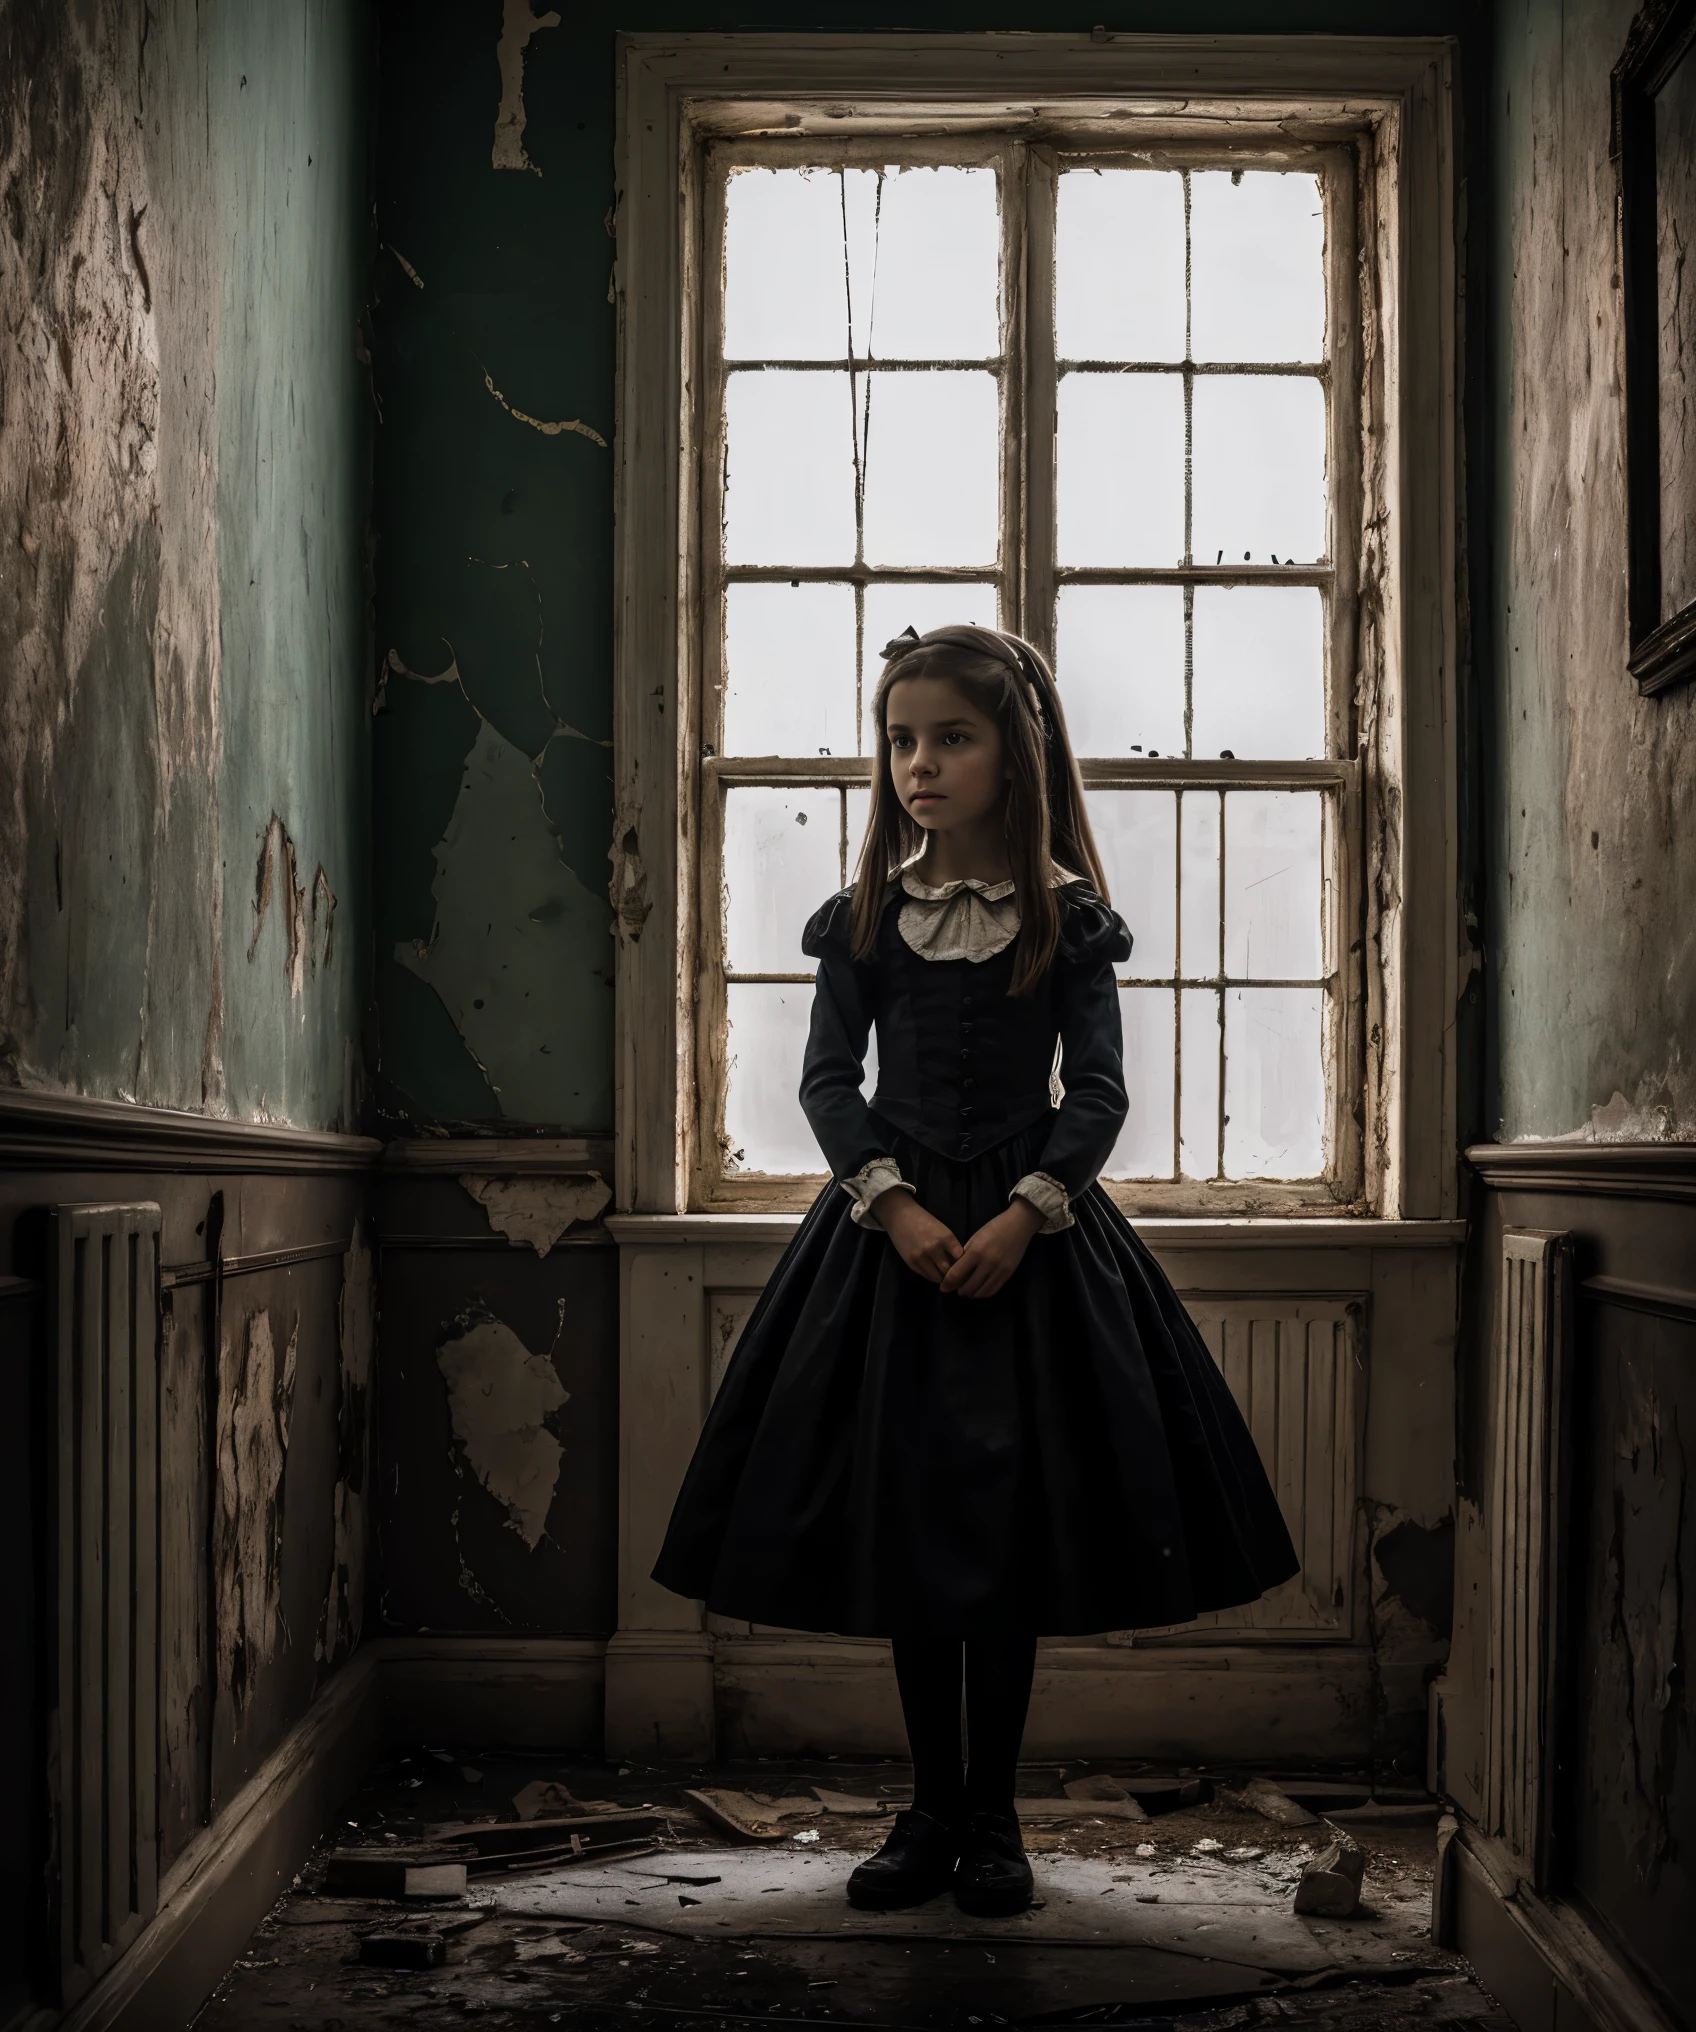 Highly detailed, photorealistic photograph of a young girl in an asylum, Alice from "Alice's Adventures in Wonderland", dark and eerie atmosphere, intricate details such as cracked walls and peeling paint, inspired by the works of Lewis Carroll and Tim Burton.